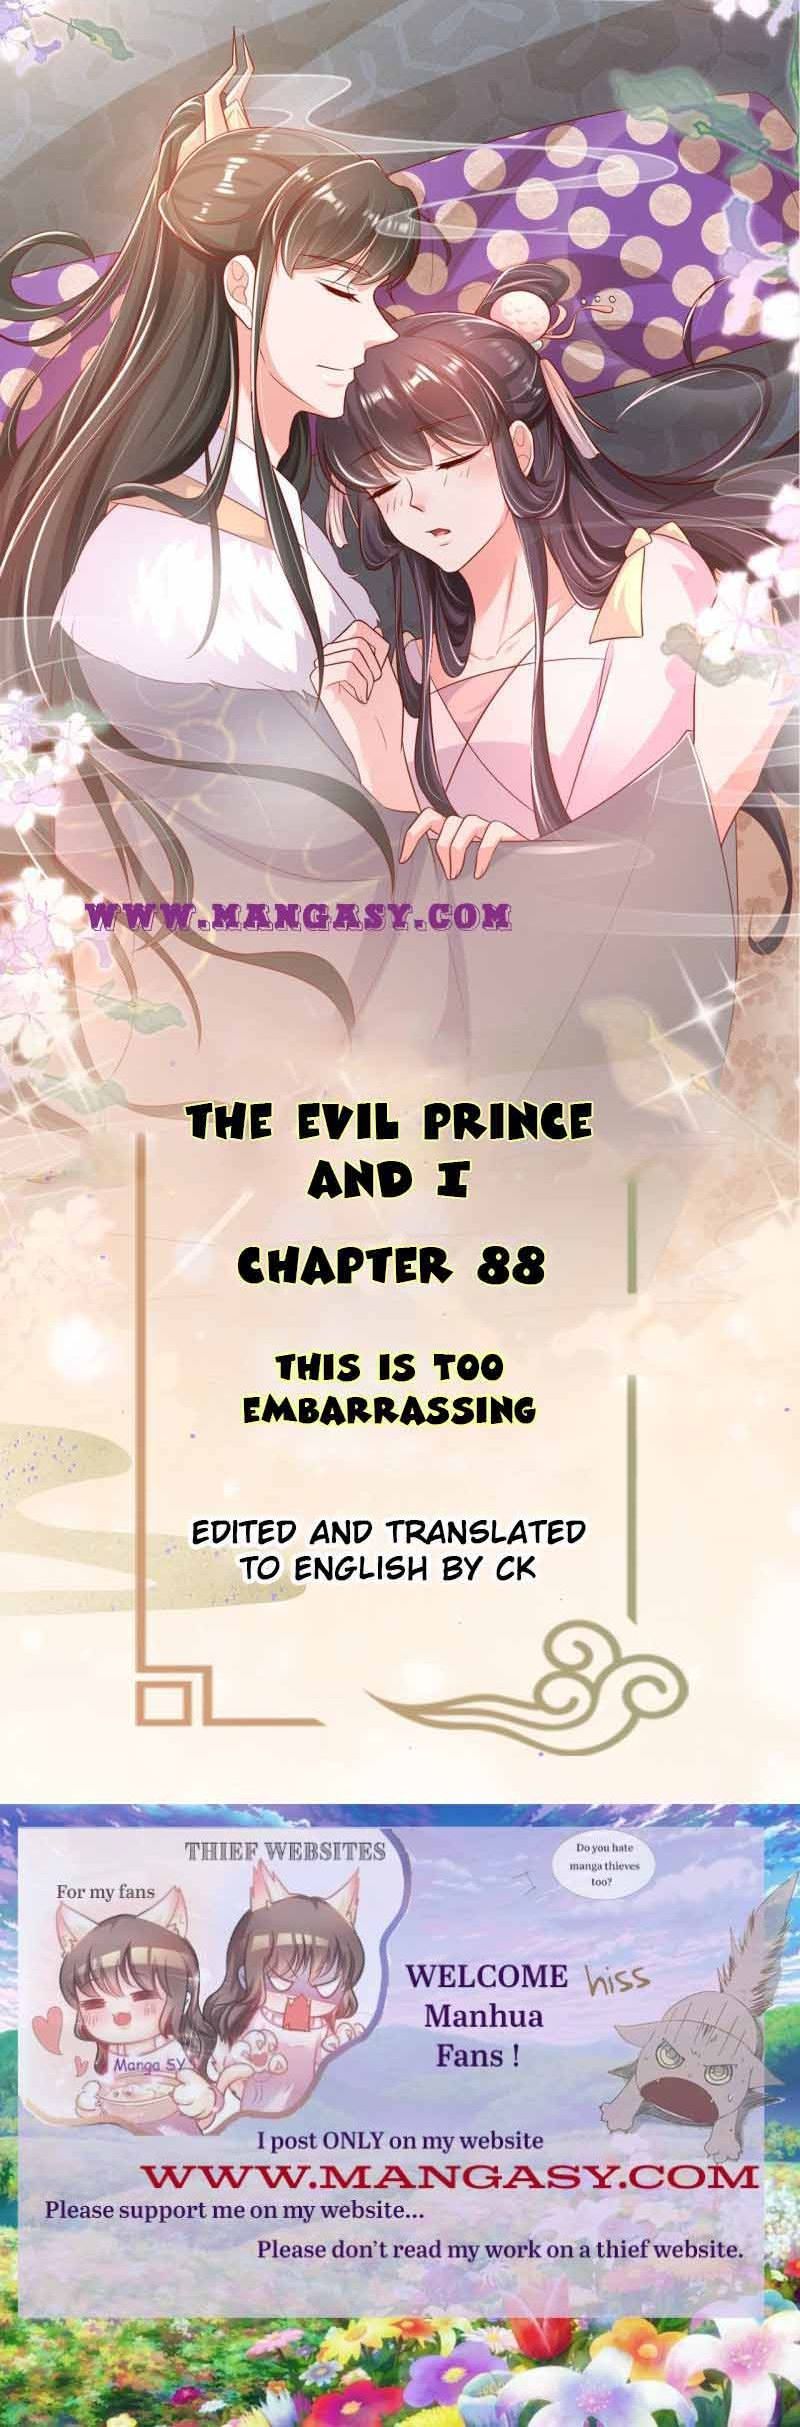 The Evil Prince And I - Page 1